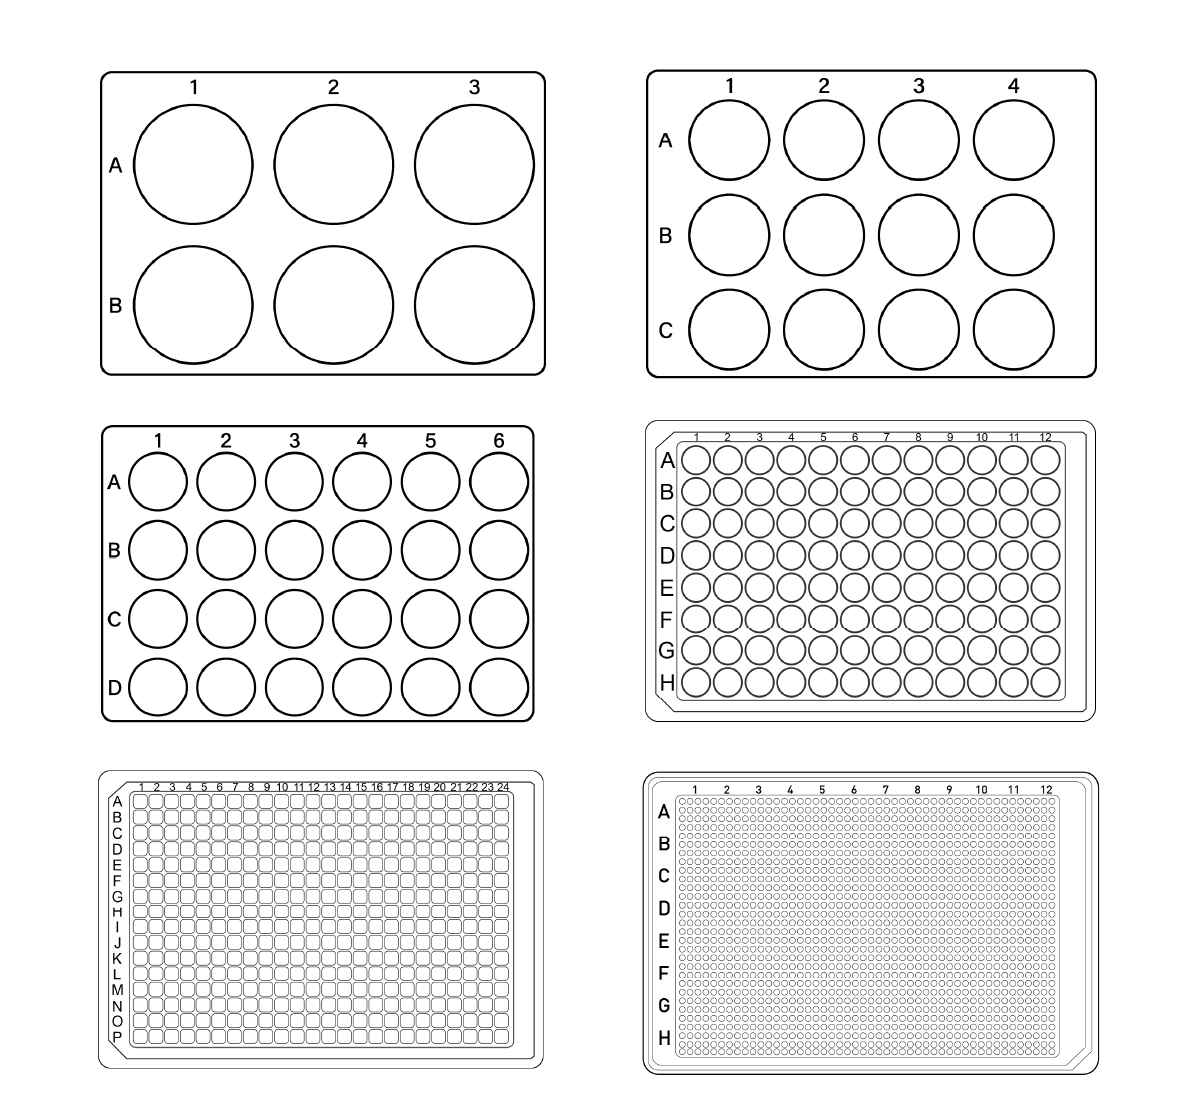 Fig. 2: Different microtiter plate layouts.